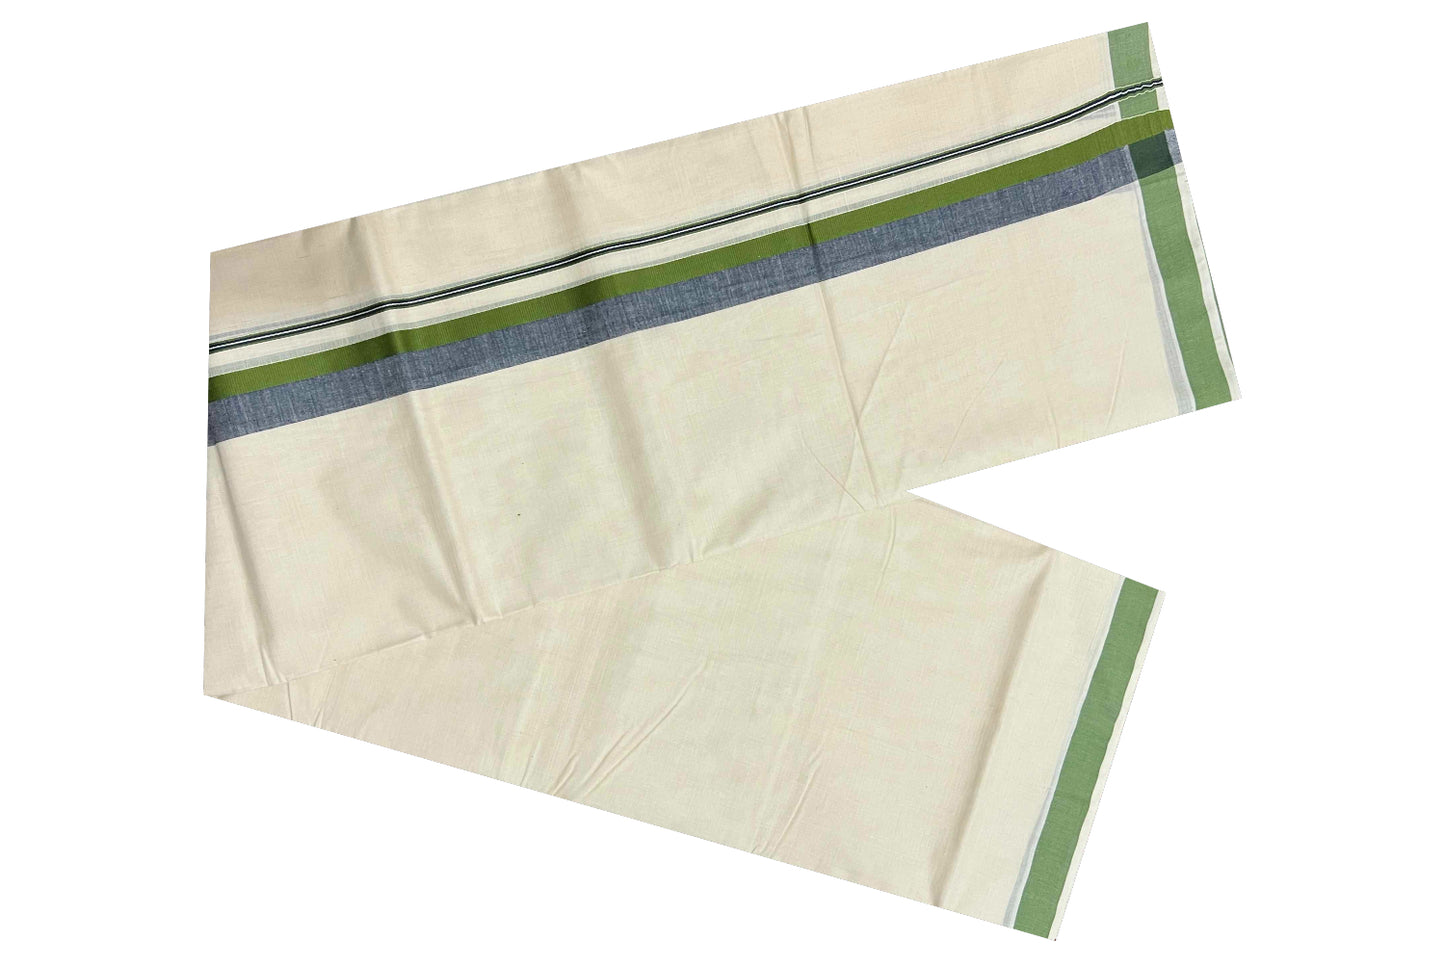 Off White Pure Cotton Double Mundu with Green and Black Shaded Border (South Indian Dhoti)